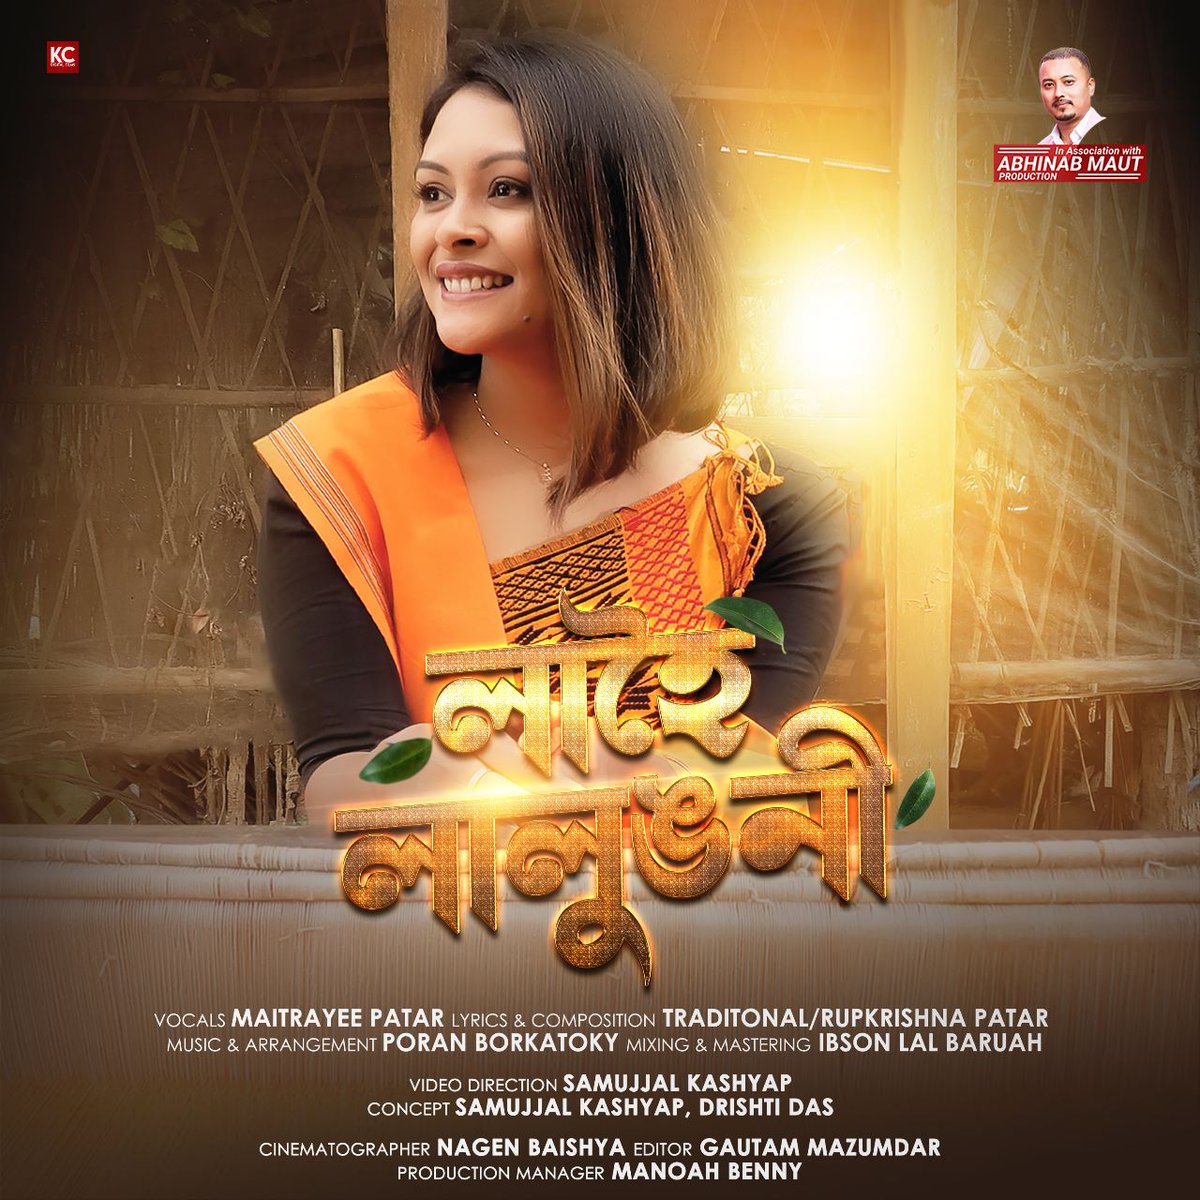 #newsongalert

Very happy to announce my next musical adventure 'লাহৈ লালুঙনী', my first in the Bihu genre! 🌻🌻 Dropping this February!! 

#newsong #maitrayeepatar #assamesesinger #lahoilalungoni #newmusic